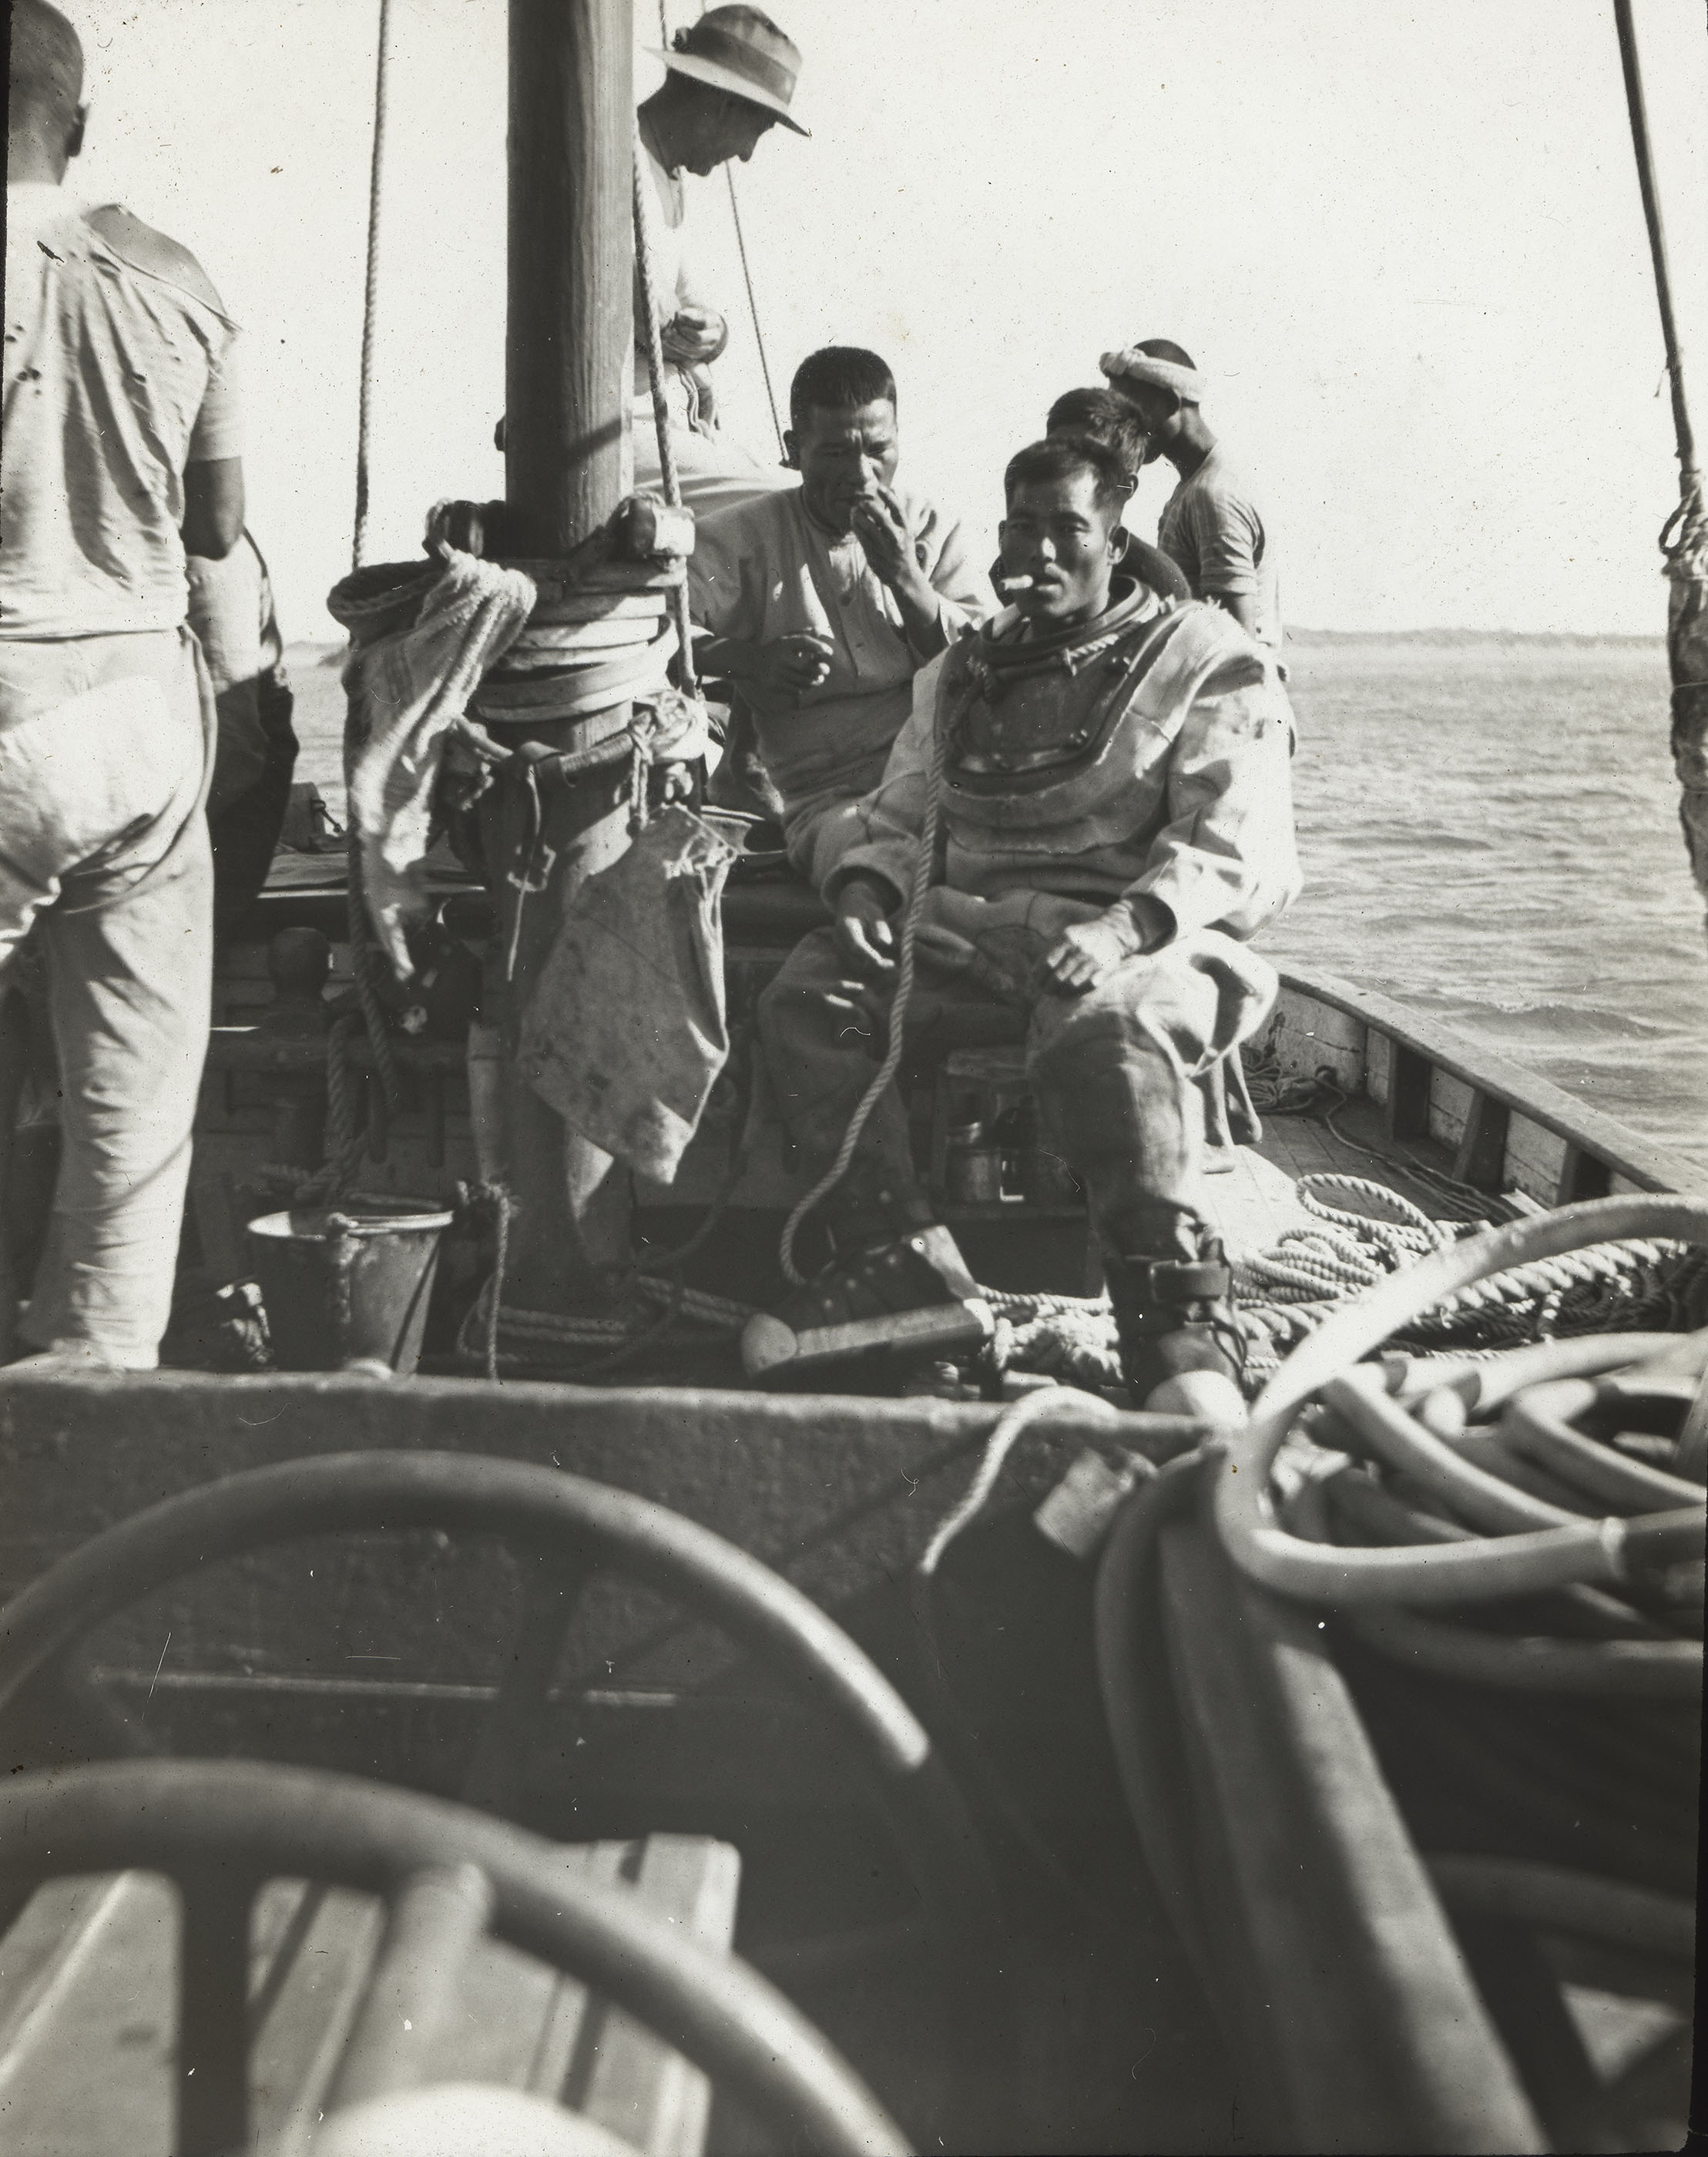 Japanese crew on a boat owned by Victor Kepert (in the hat), Broome, about 1914 or early 1920s.